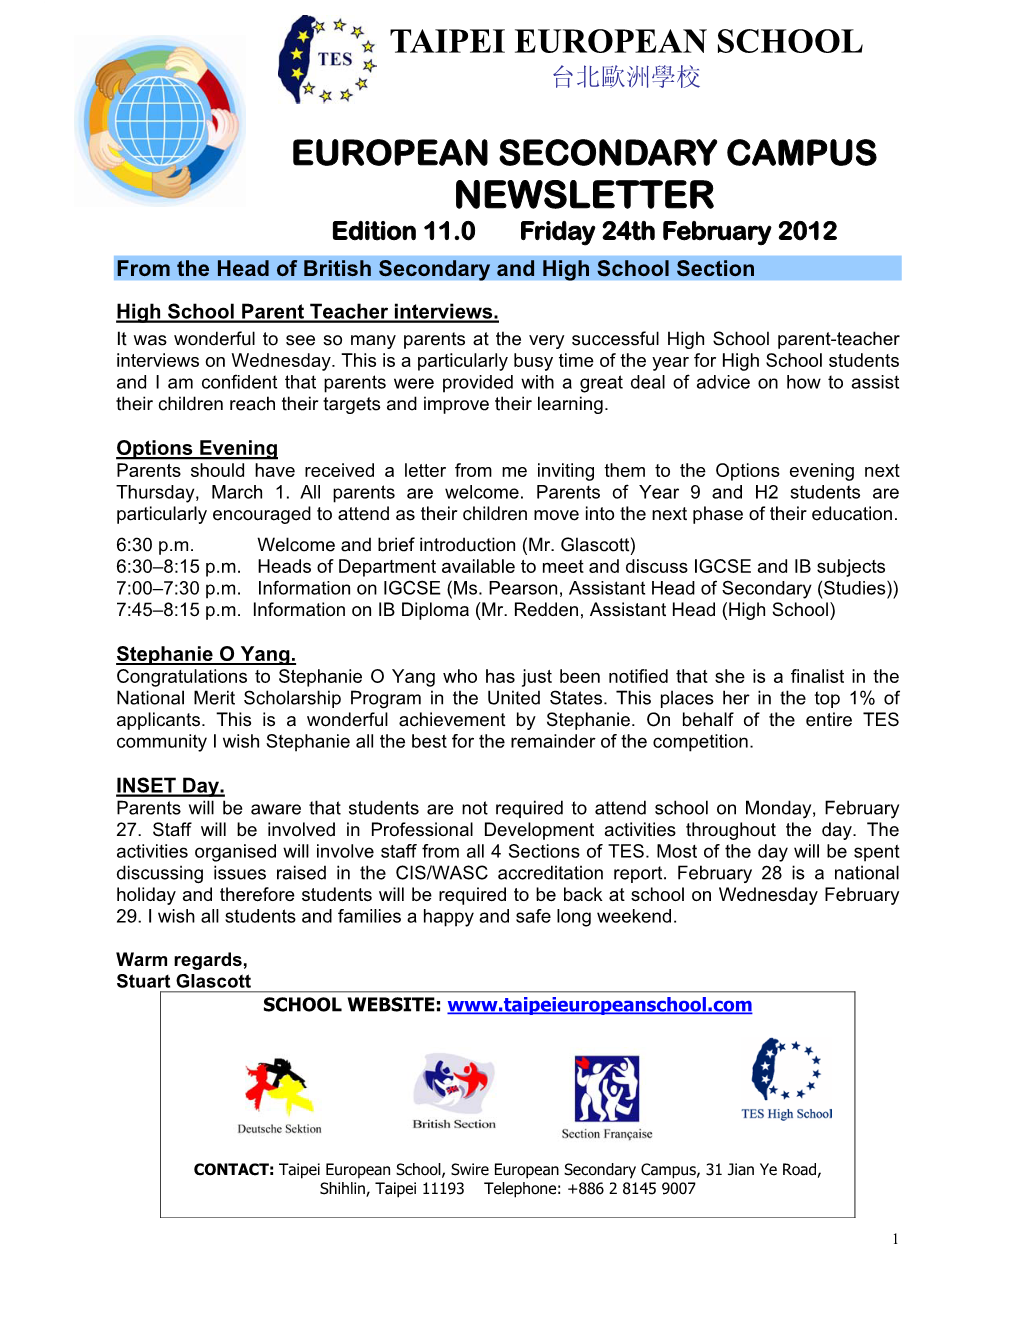 NEWSLETTER Edition 11.0 Friday 24Th February 2012